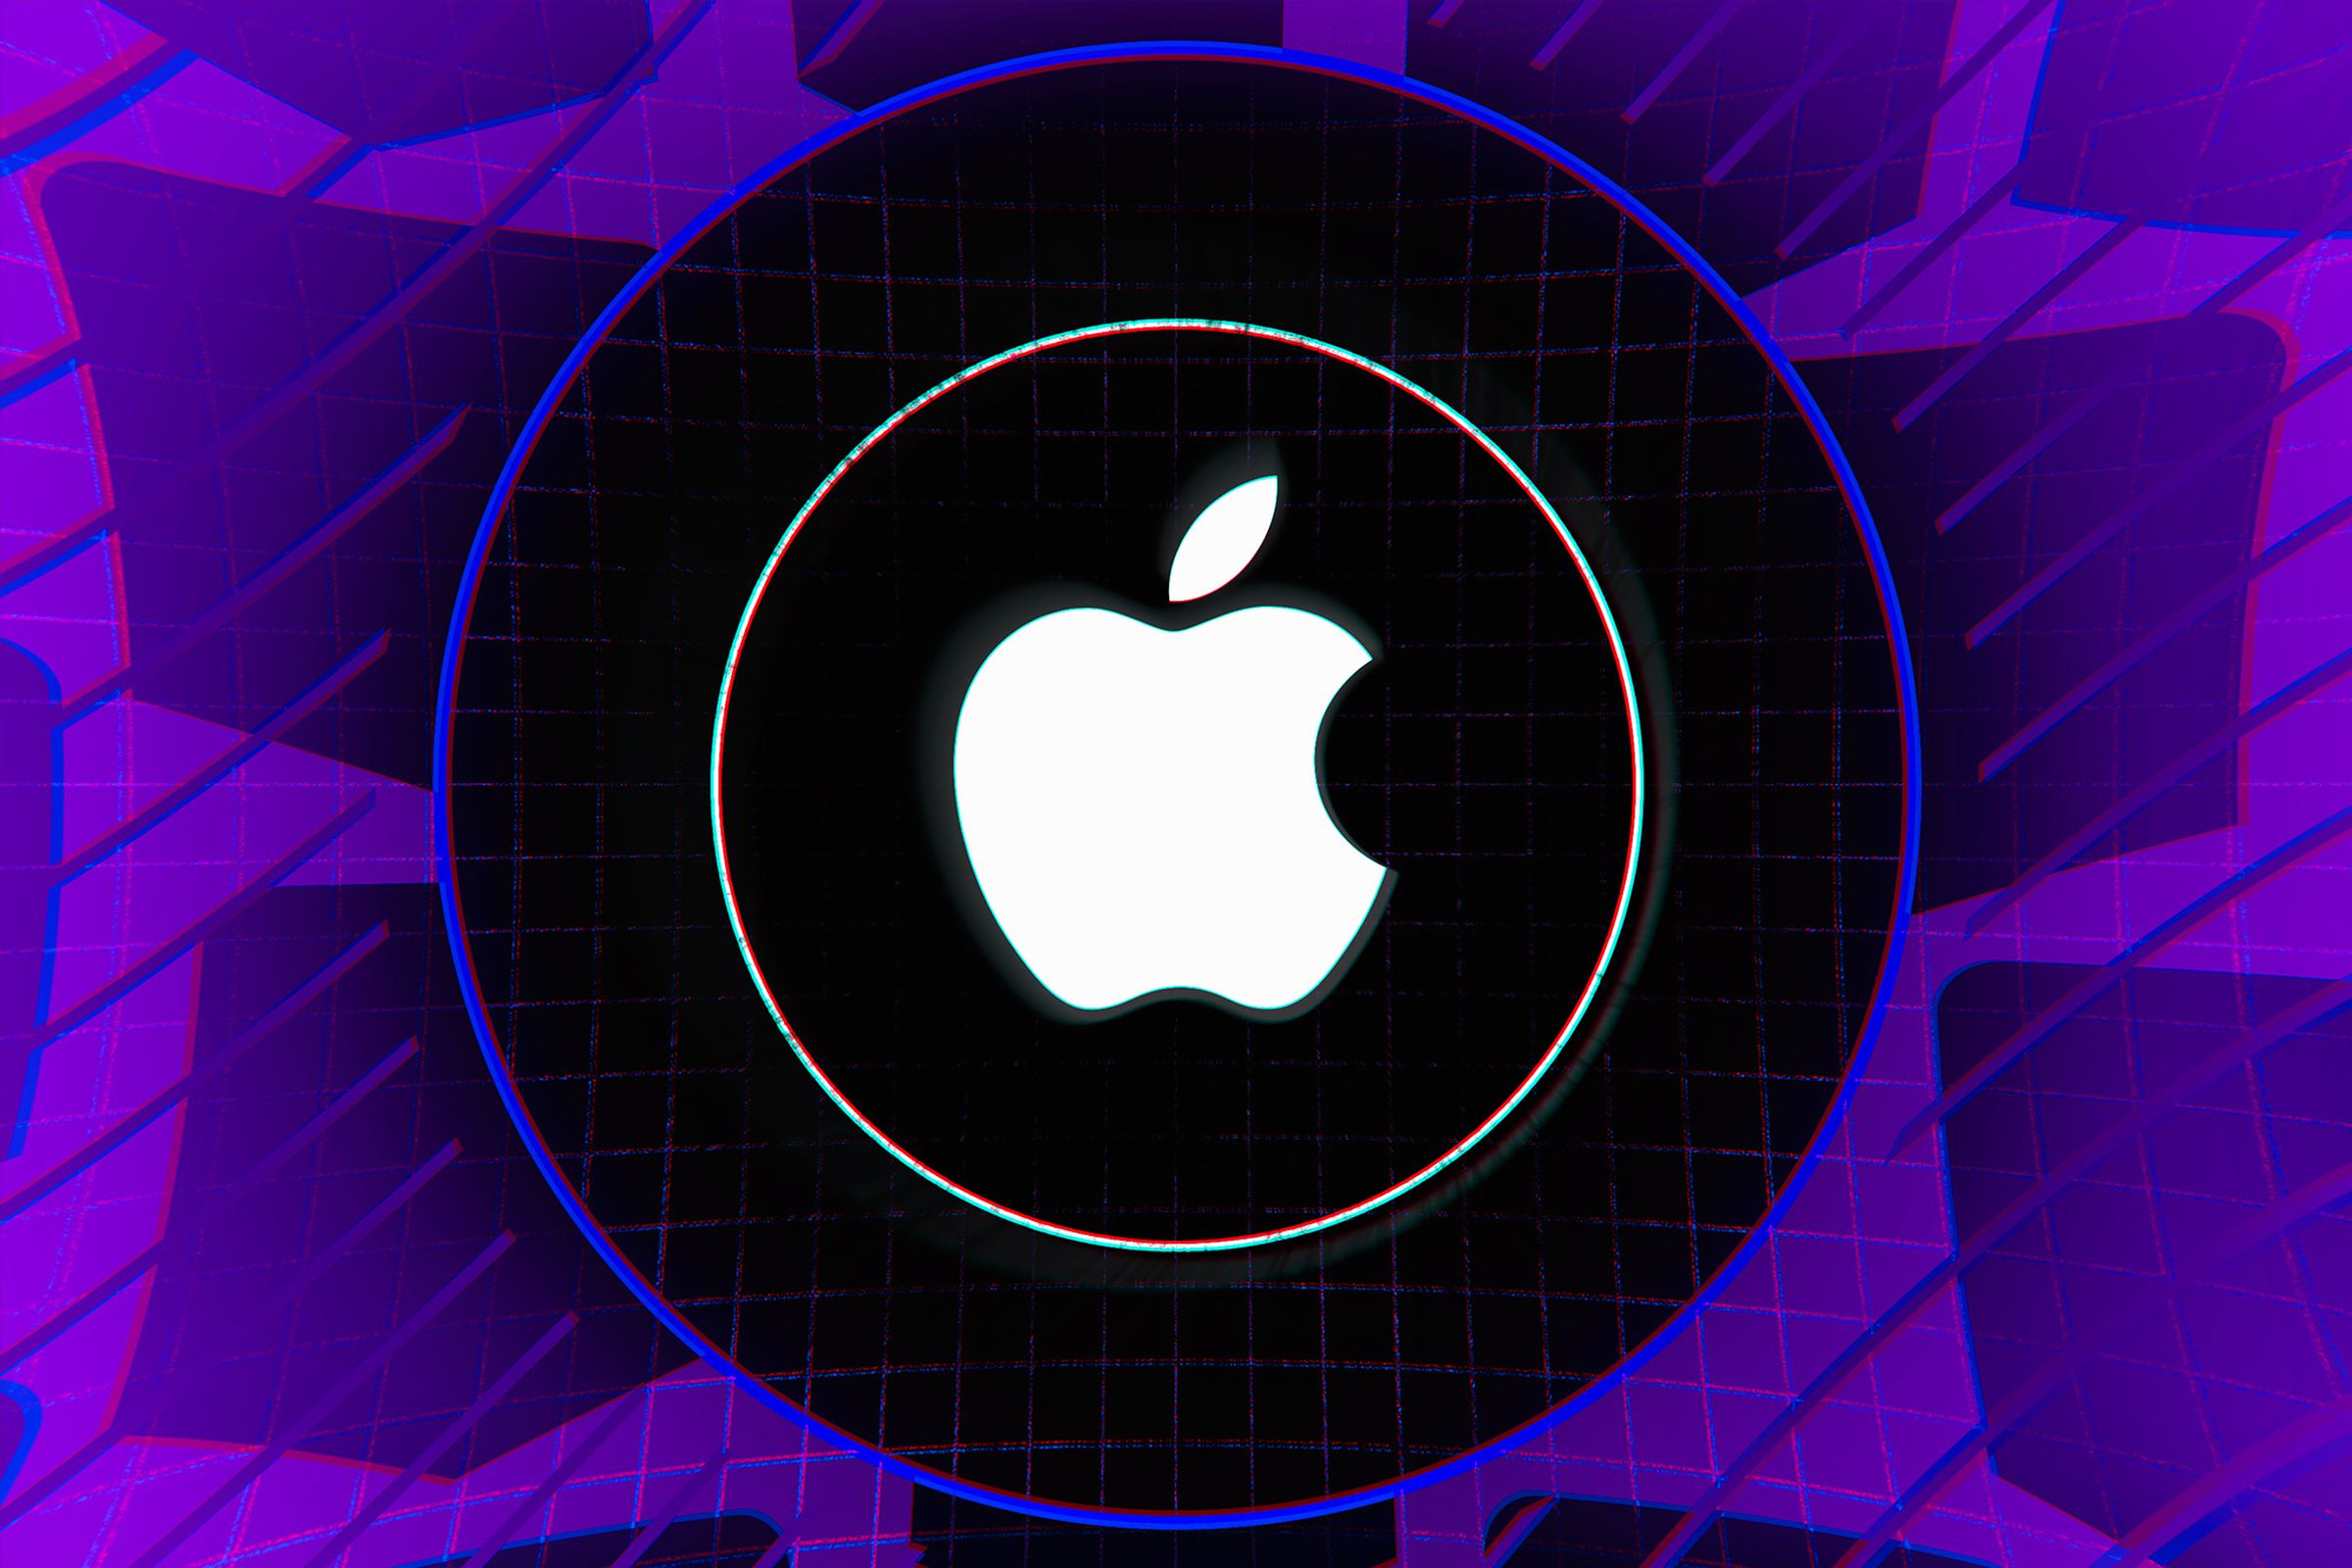 Apple is appealing the Epic Games ruling